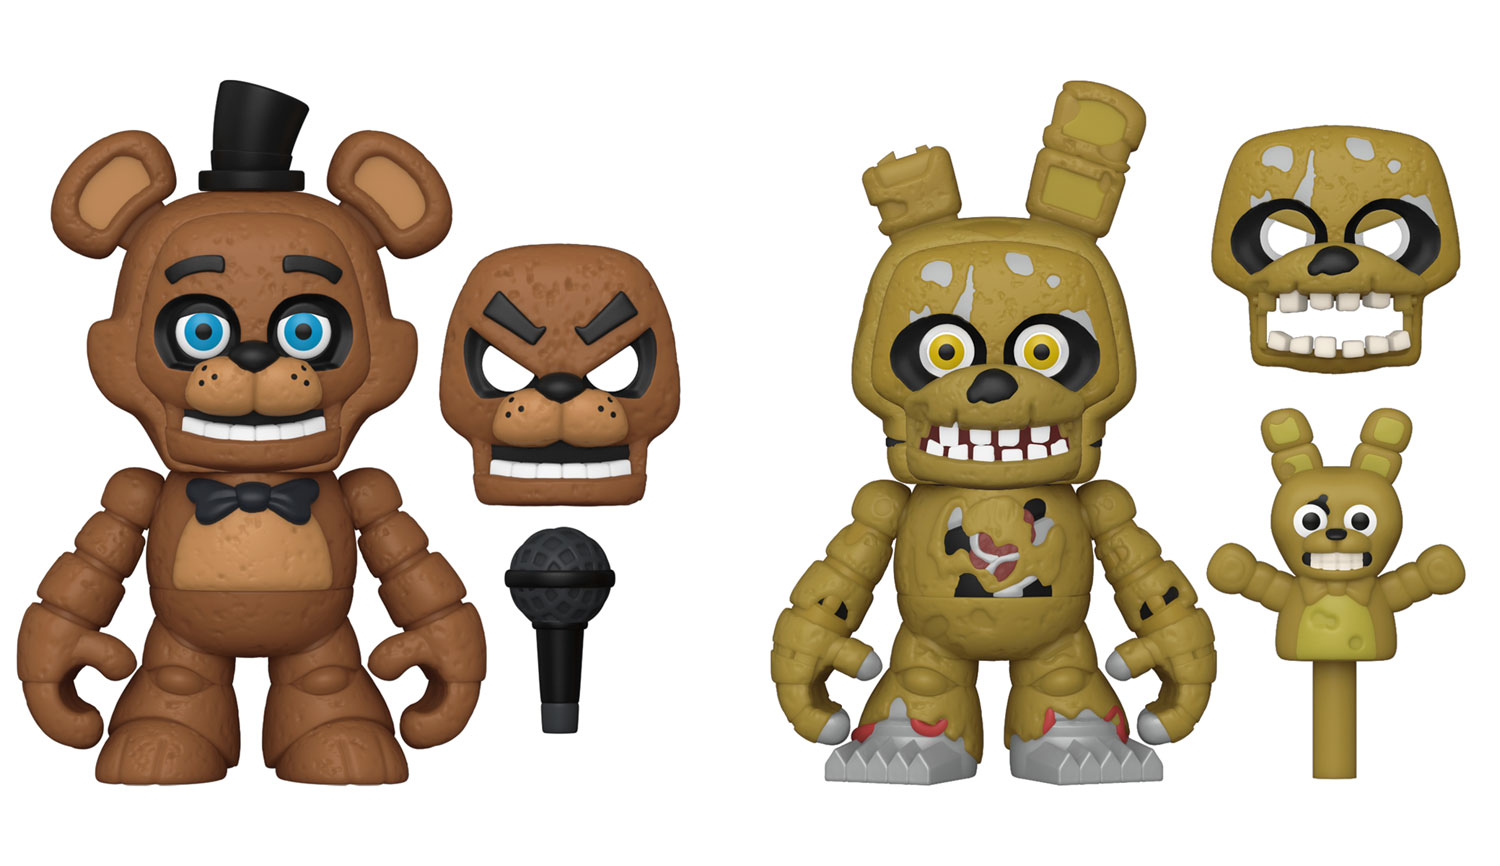 Funko Snaps!: Five Nights at Freddy's - Freddy and Springtrap, 2 Pack